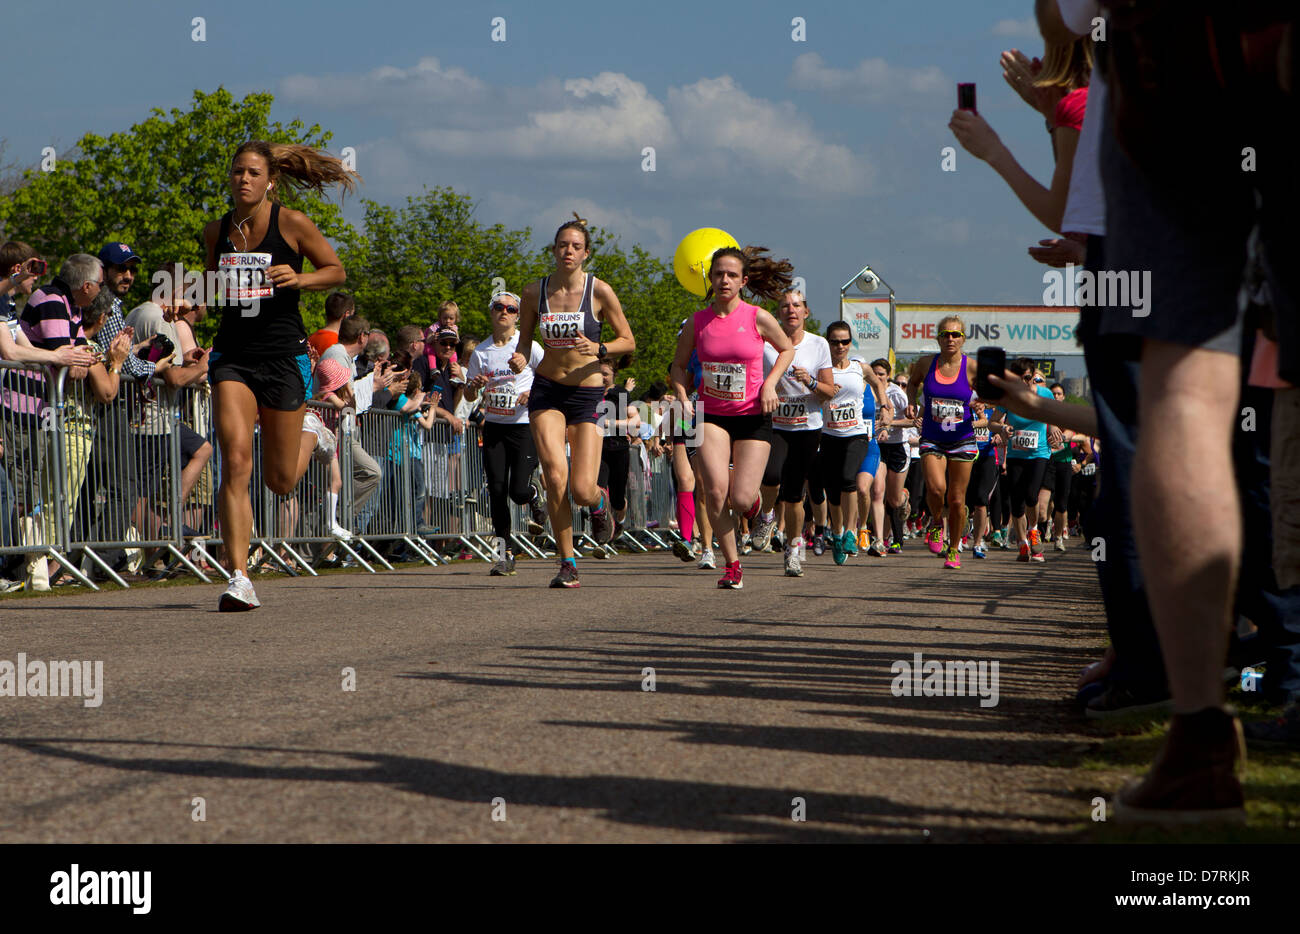 Leading competitors get away from the start line at the She Runs Windsor event. Stock Photo